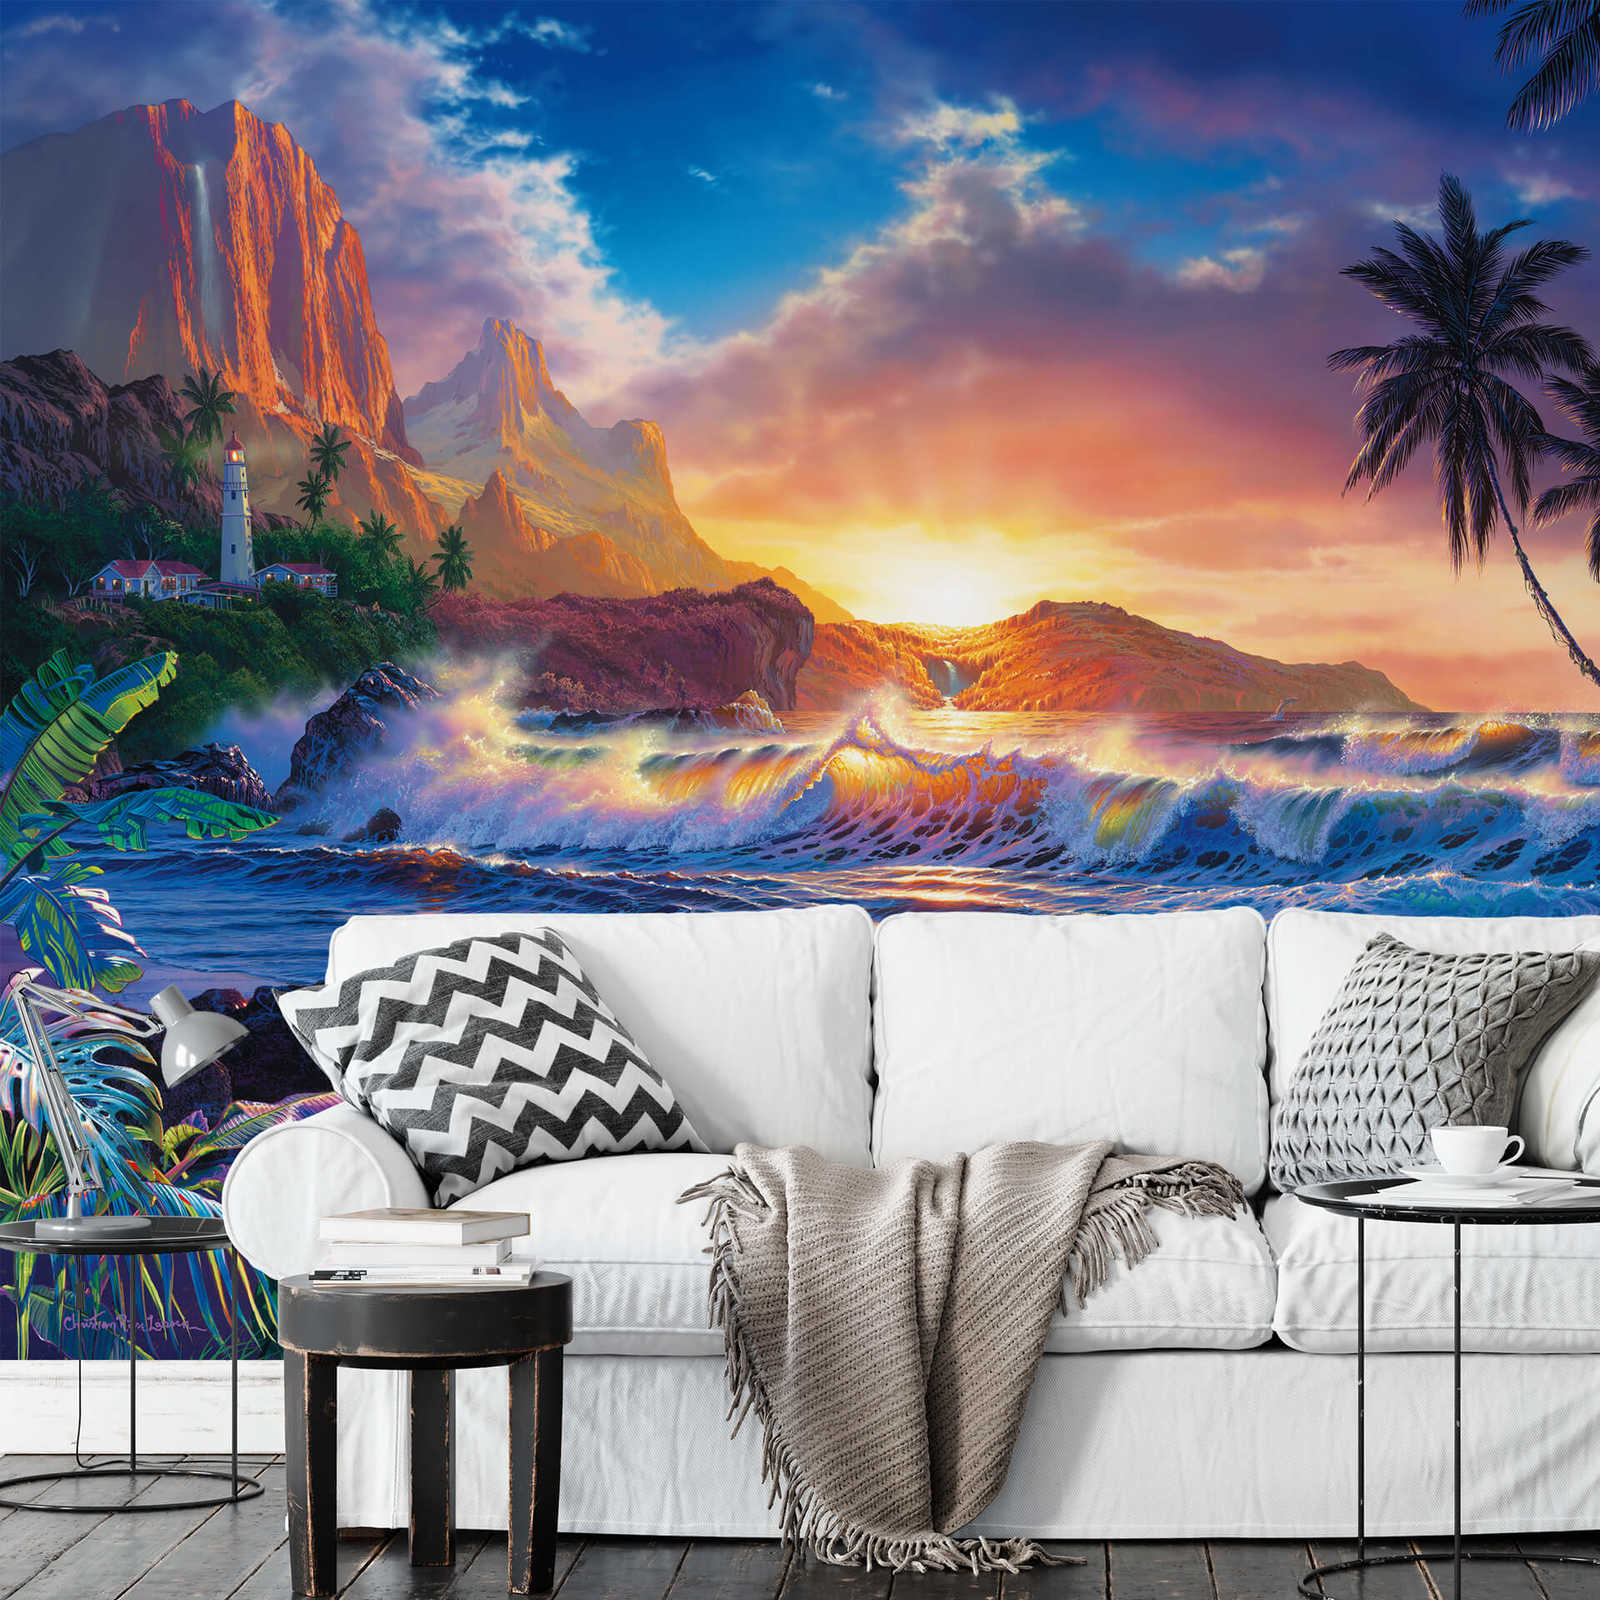             Paradise mural with tropical coastal landscape
        